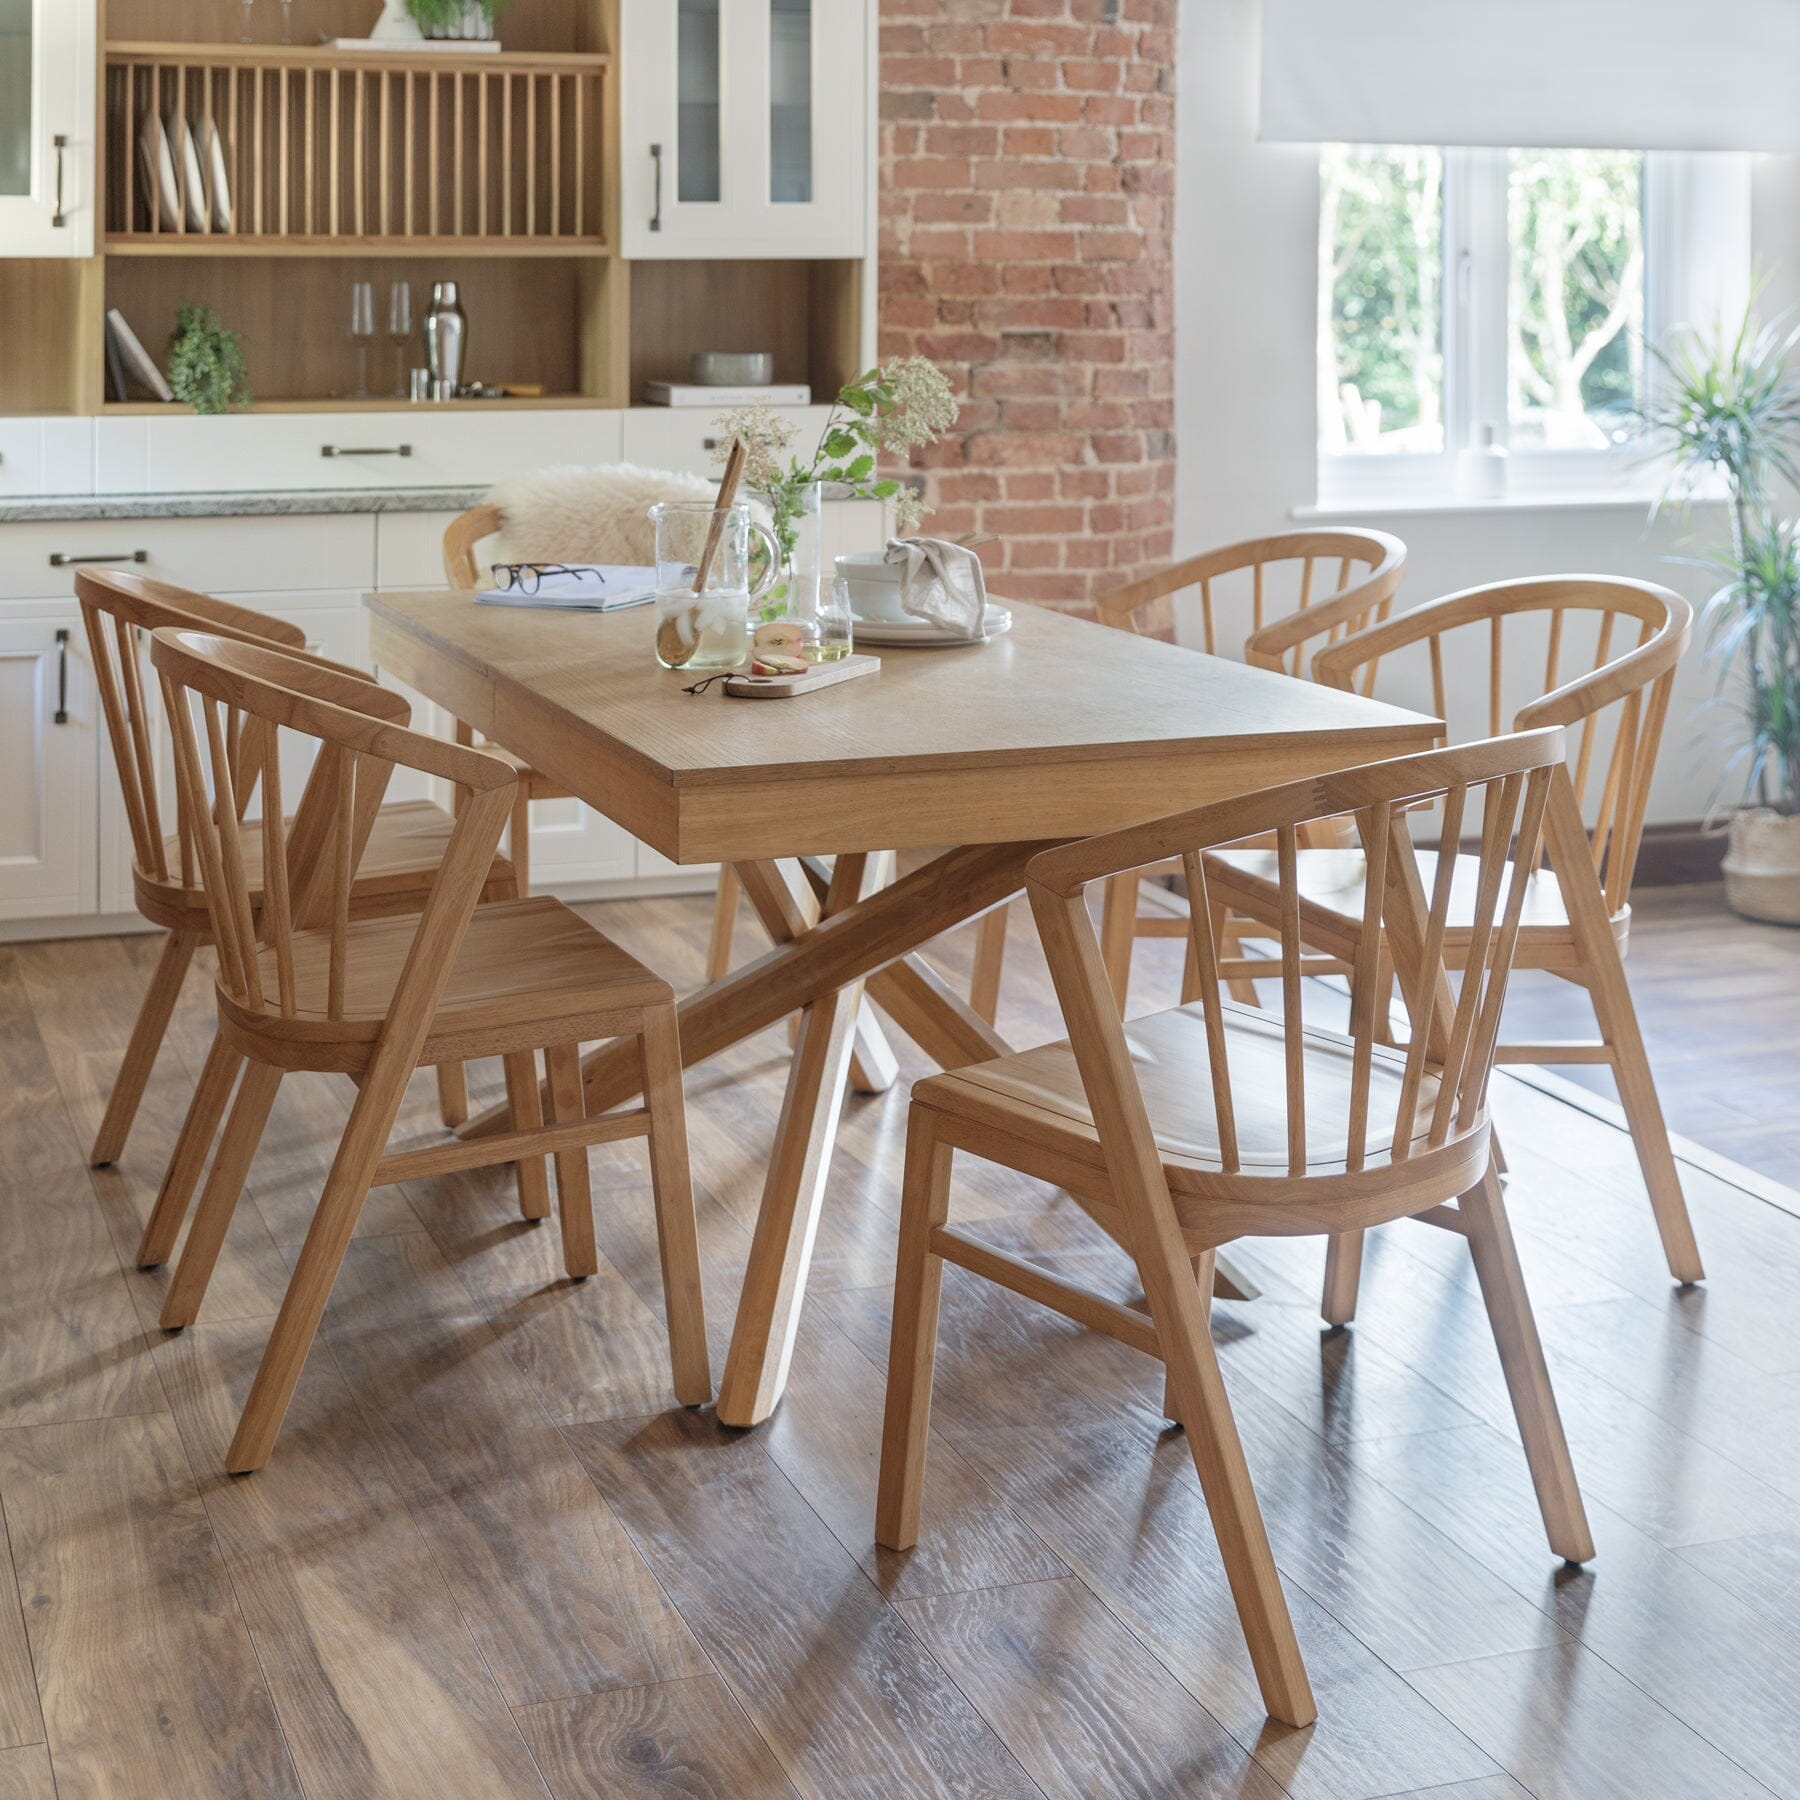 Mabel Wooden Spindle Dining Chairs Set of 2 - Pale Oak – Laura James Ireland